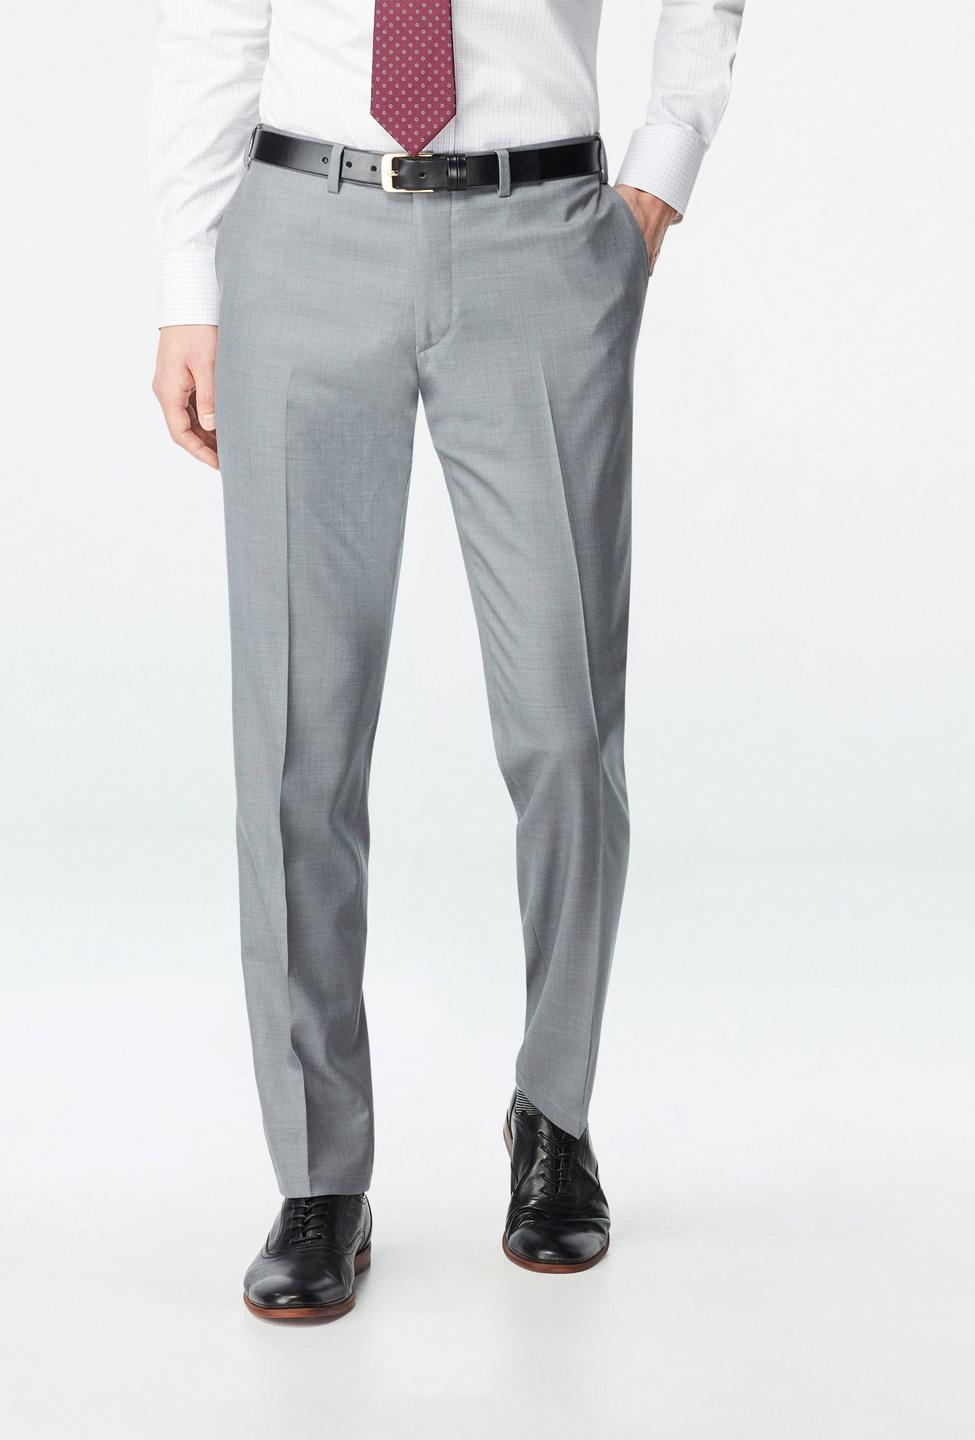 Gray pants - Highbridge Solid Design from Luxury Indochino Collection